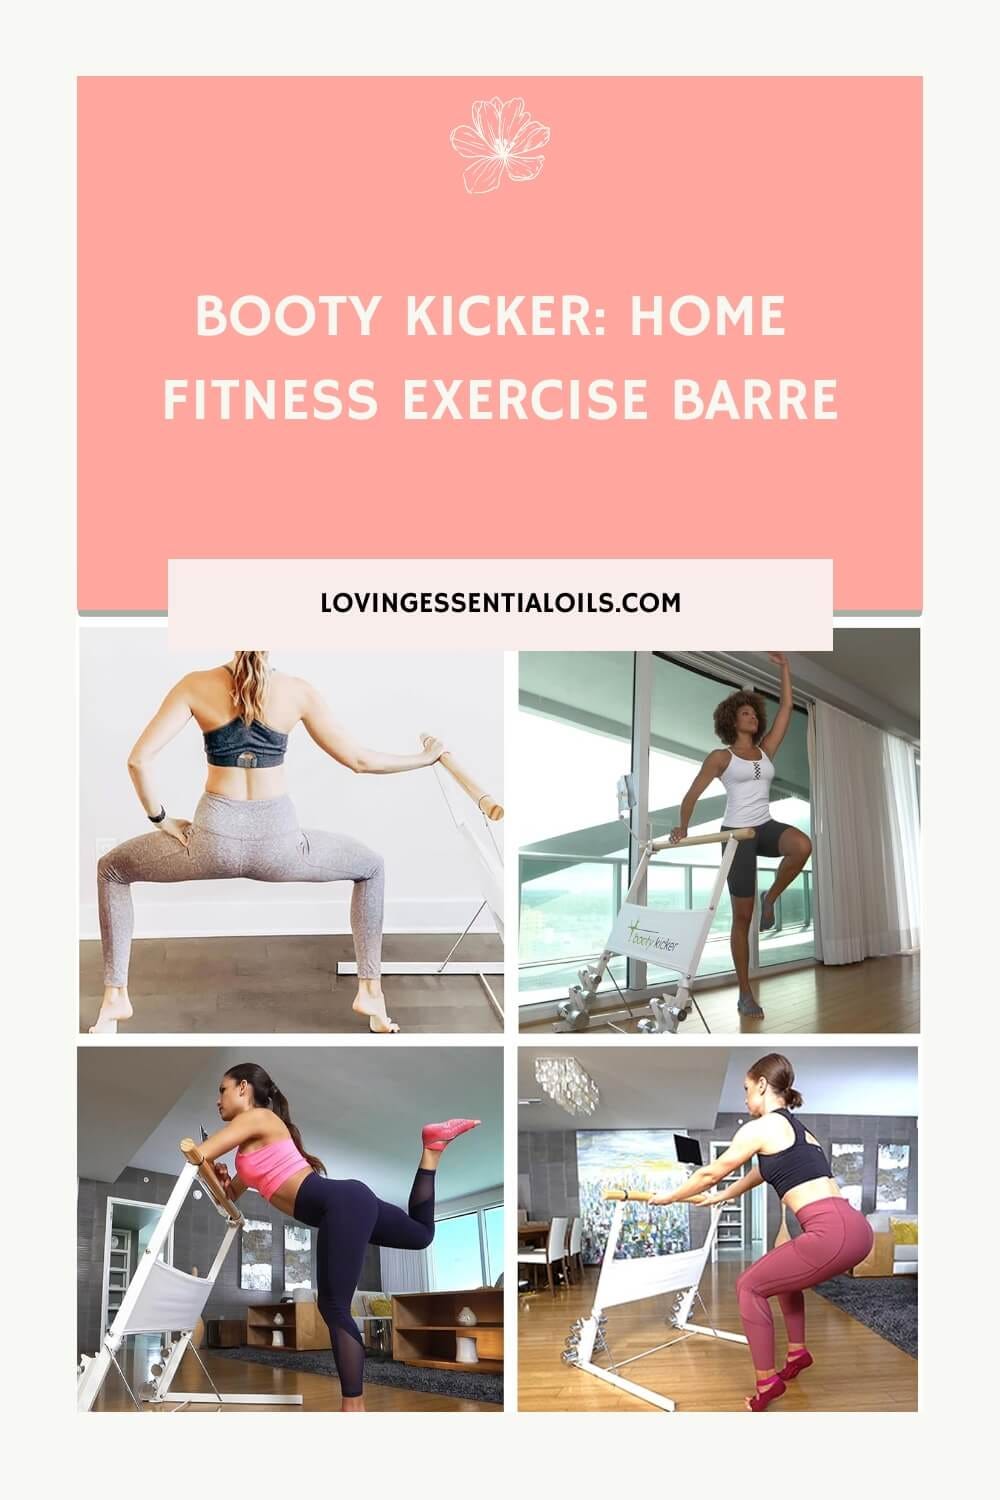 Booty Kicker Home Fitness Exercise Barre